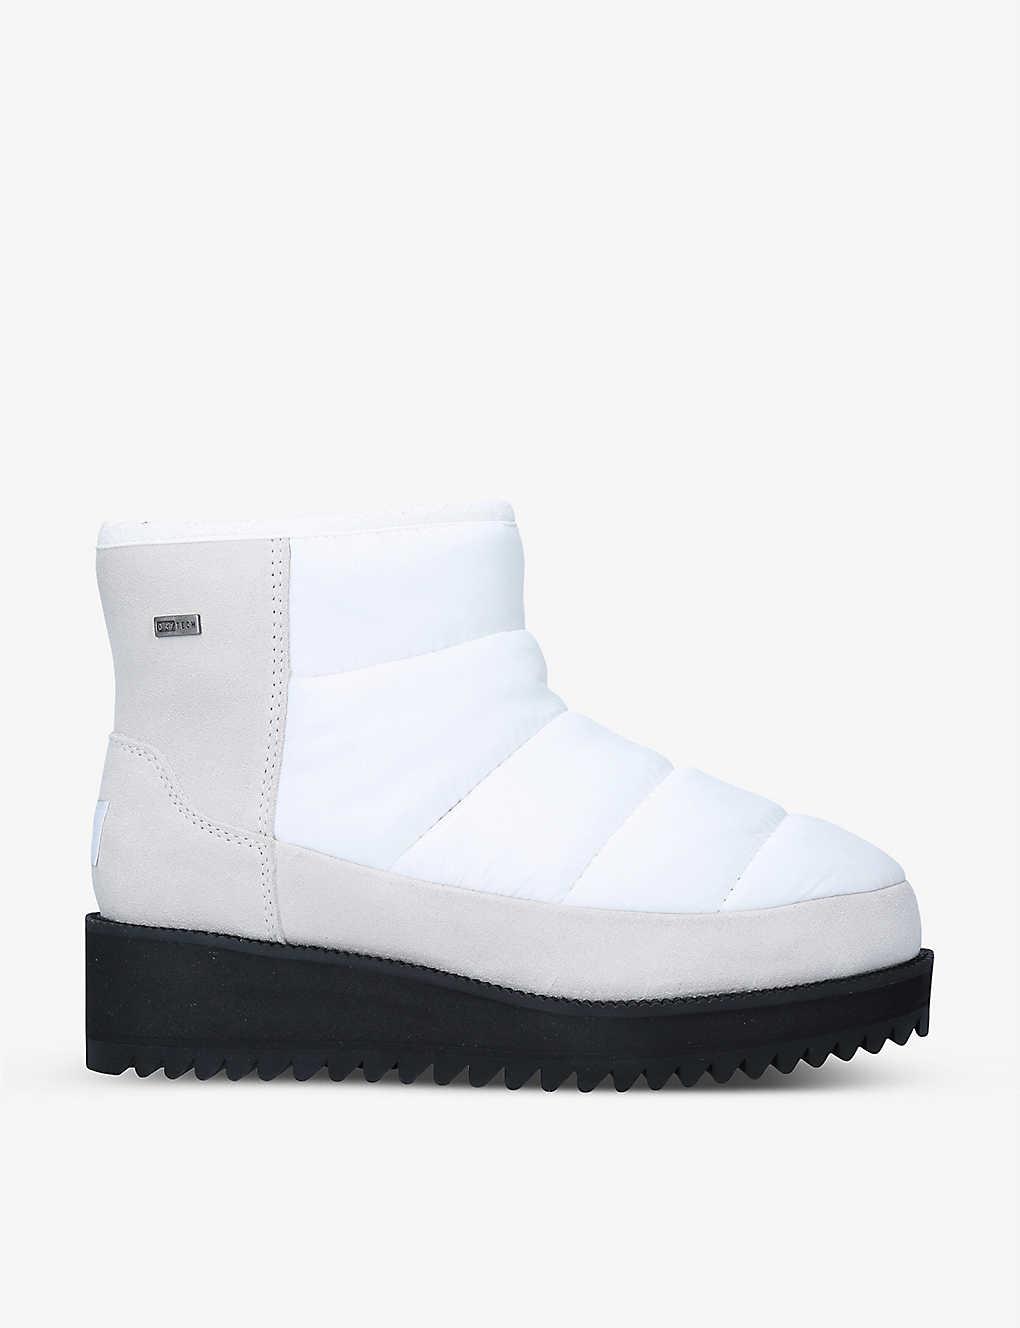 UGG Ridge Mini Padded Snow Boots in White - Lyst